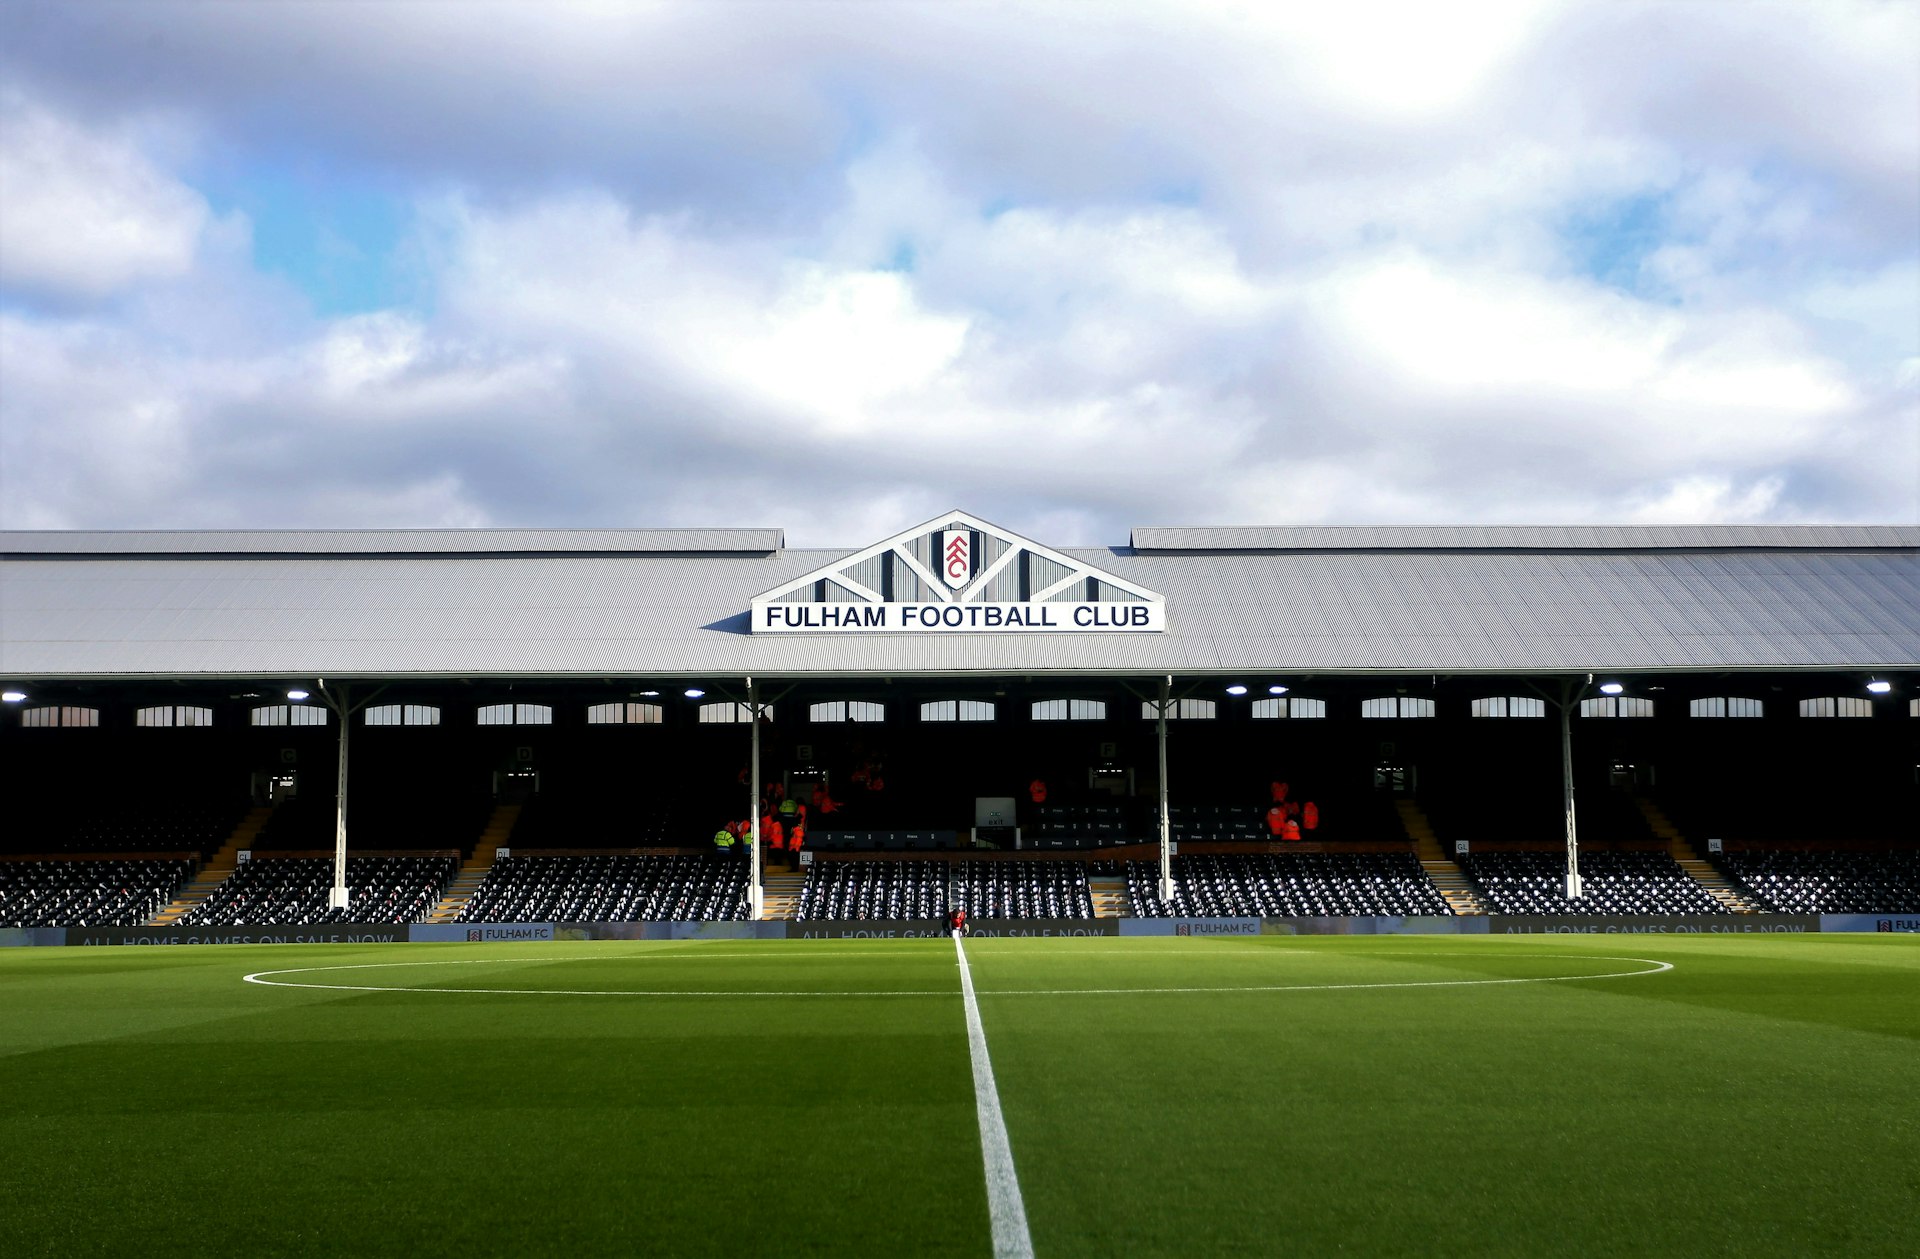 Craven Cottage football ground on a slightly overcast day. The football pitch and stands are empty and the vibrant green grass looks perfect. 